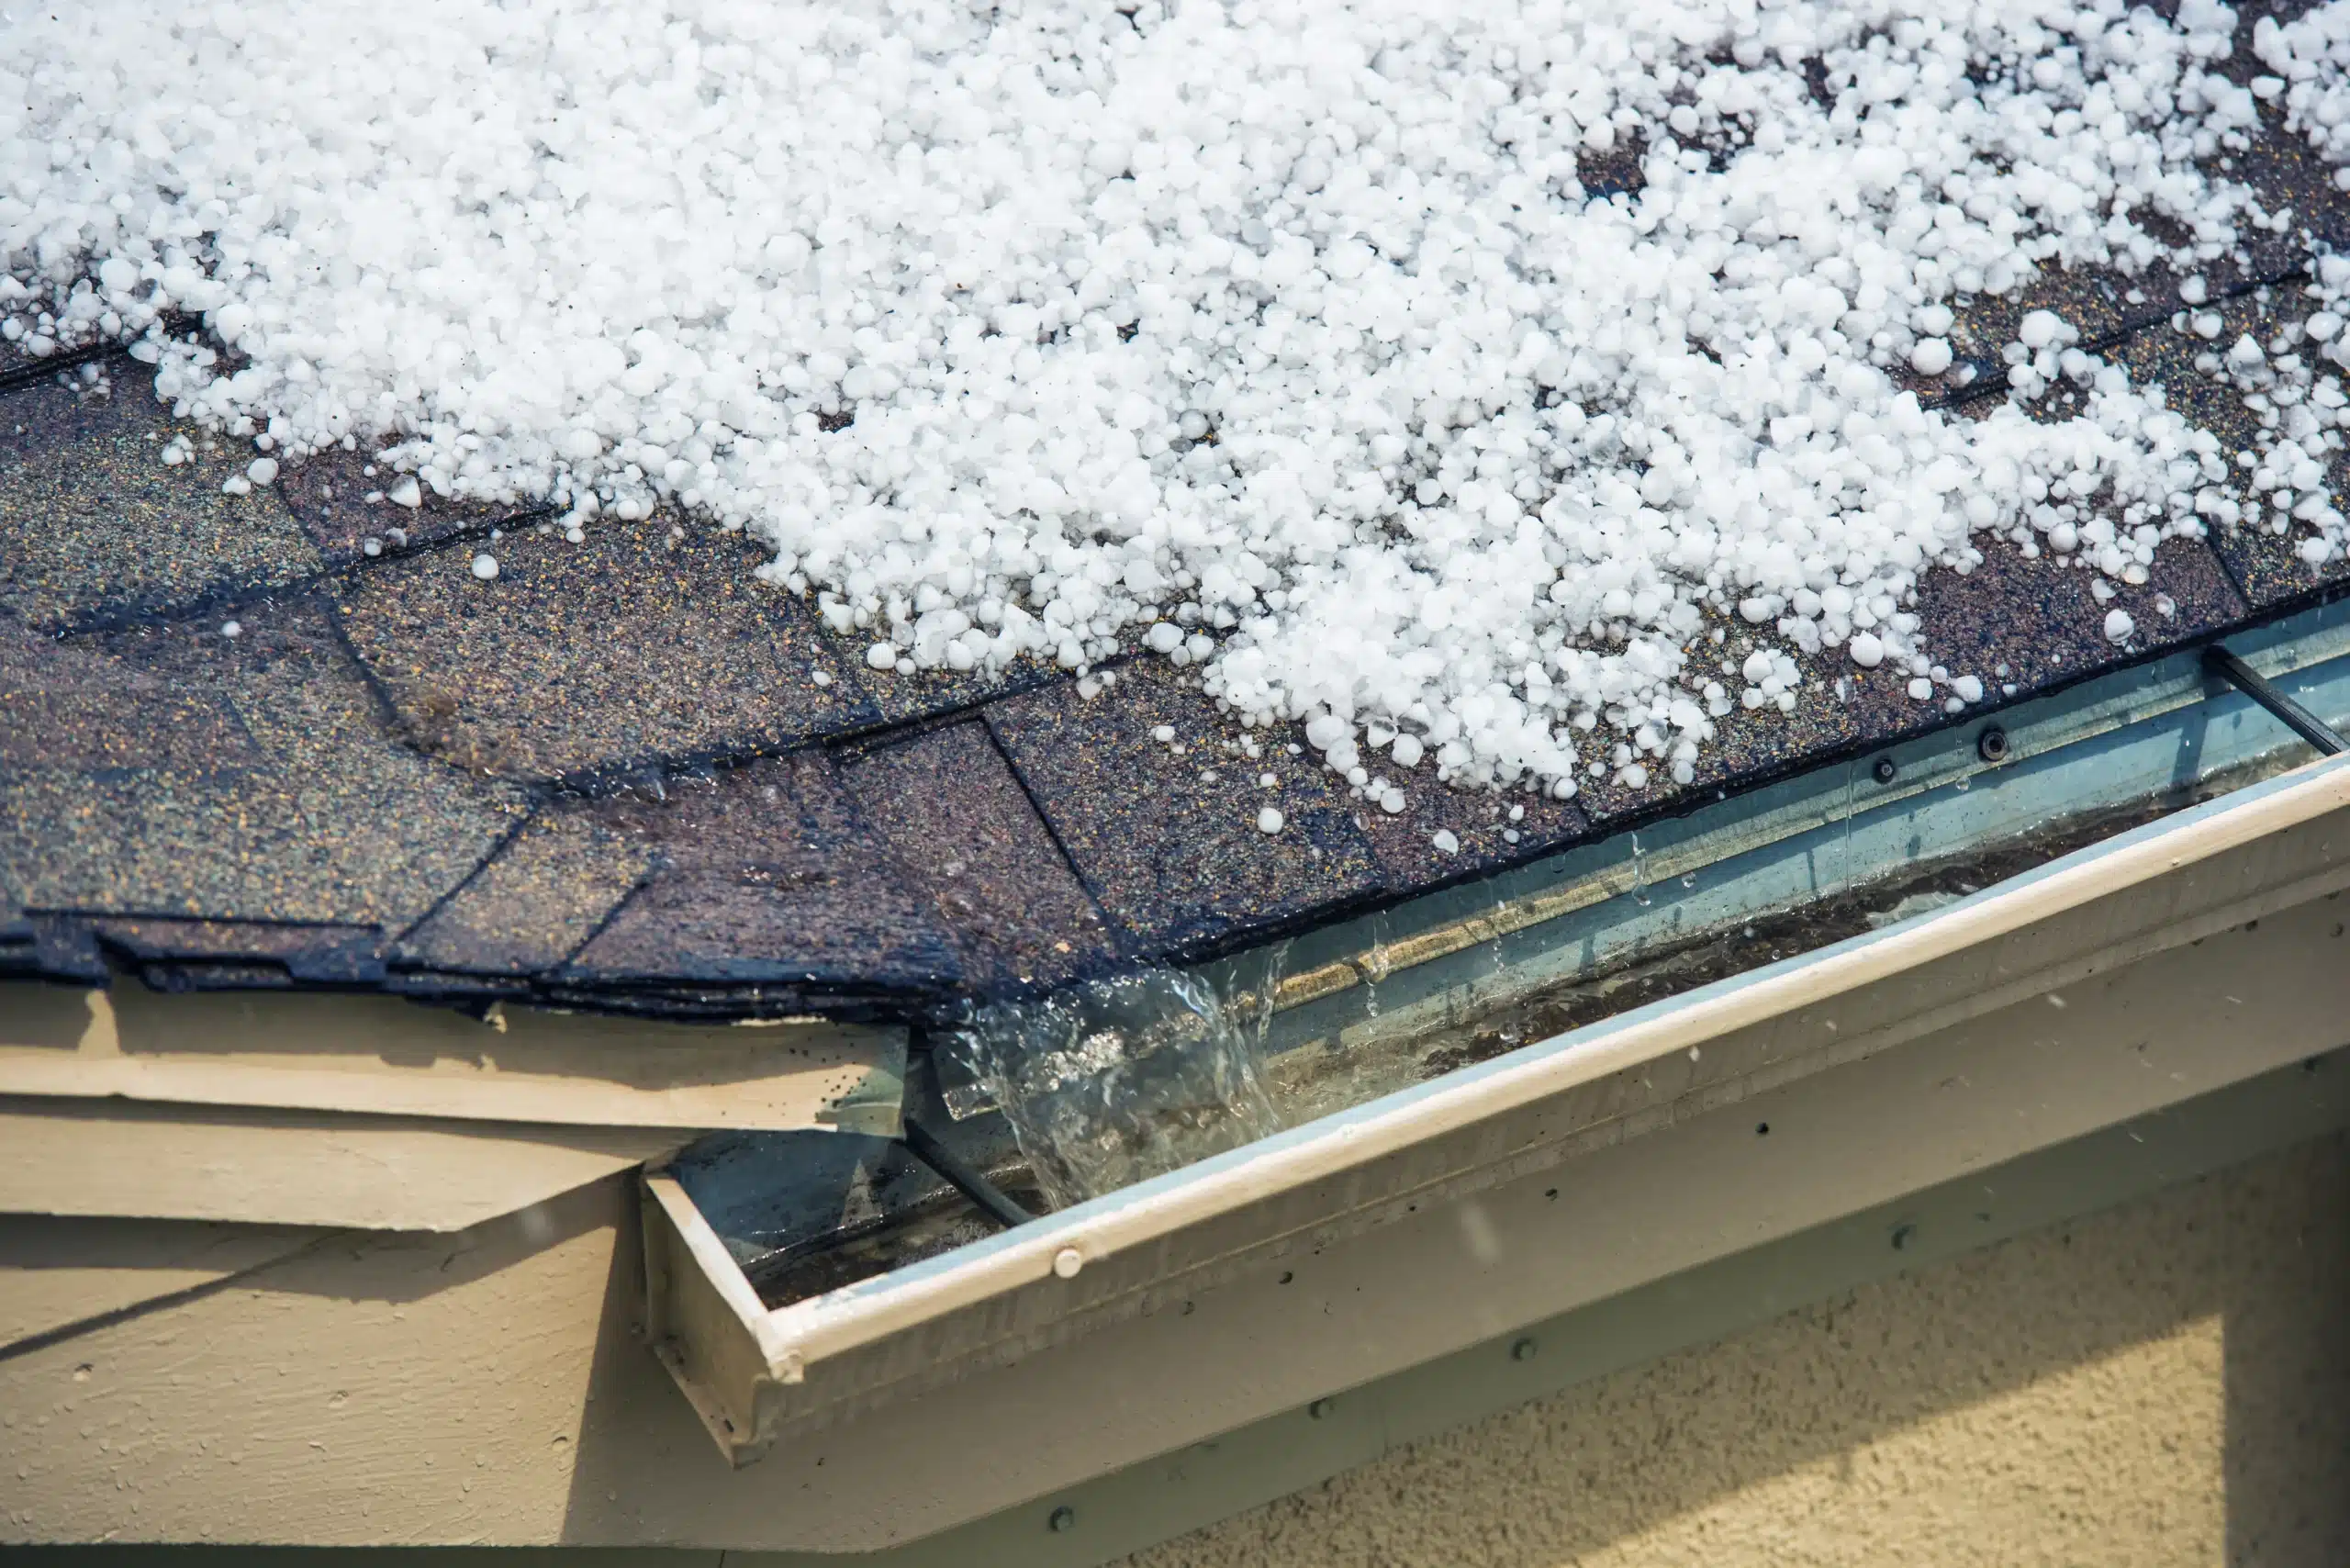 How to Identify Hail Damage to a Roof